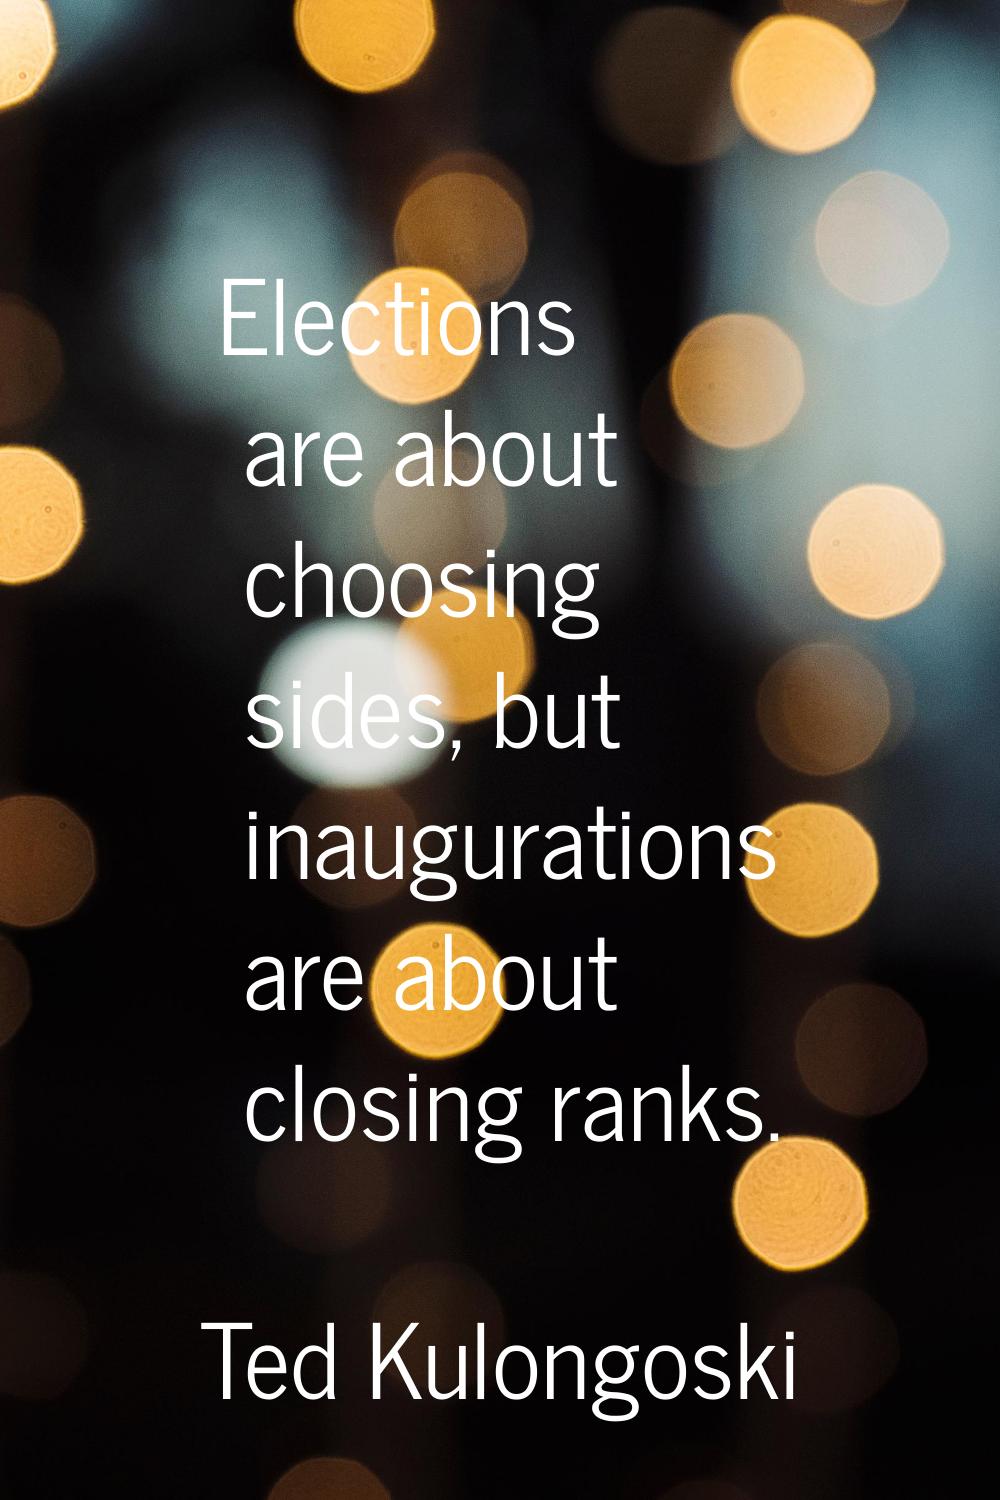 Elections are about choosing sides, but inaugurations are about closing ranks.